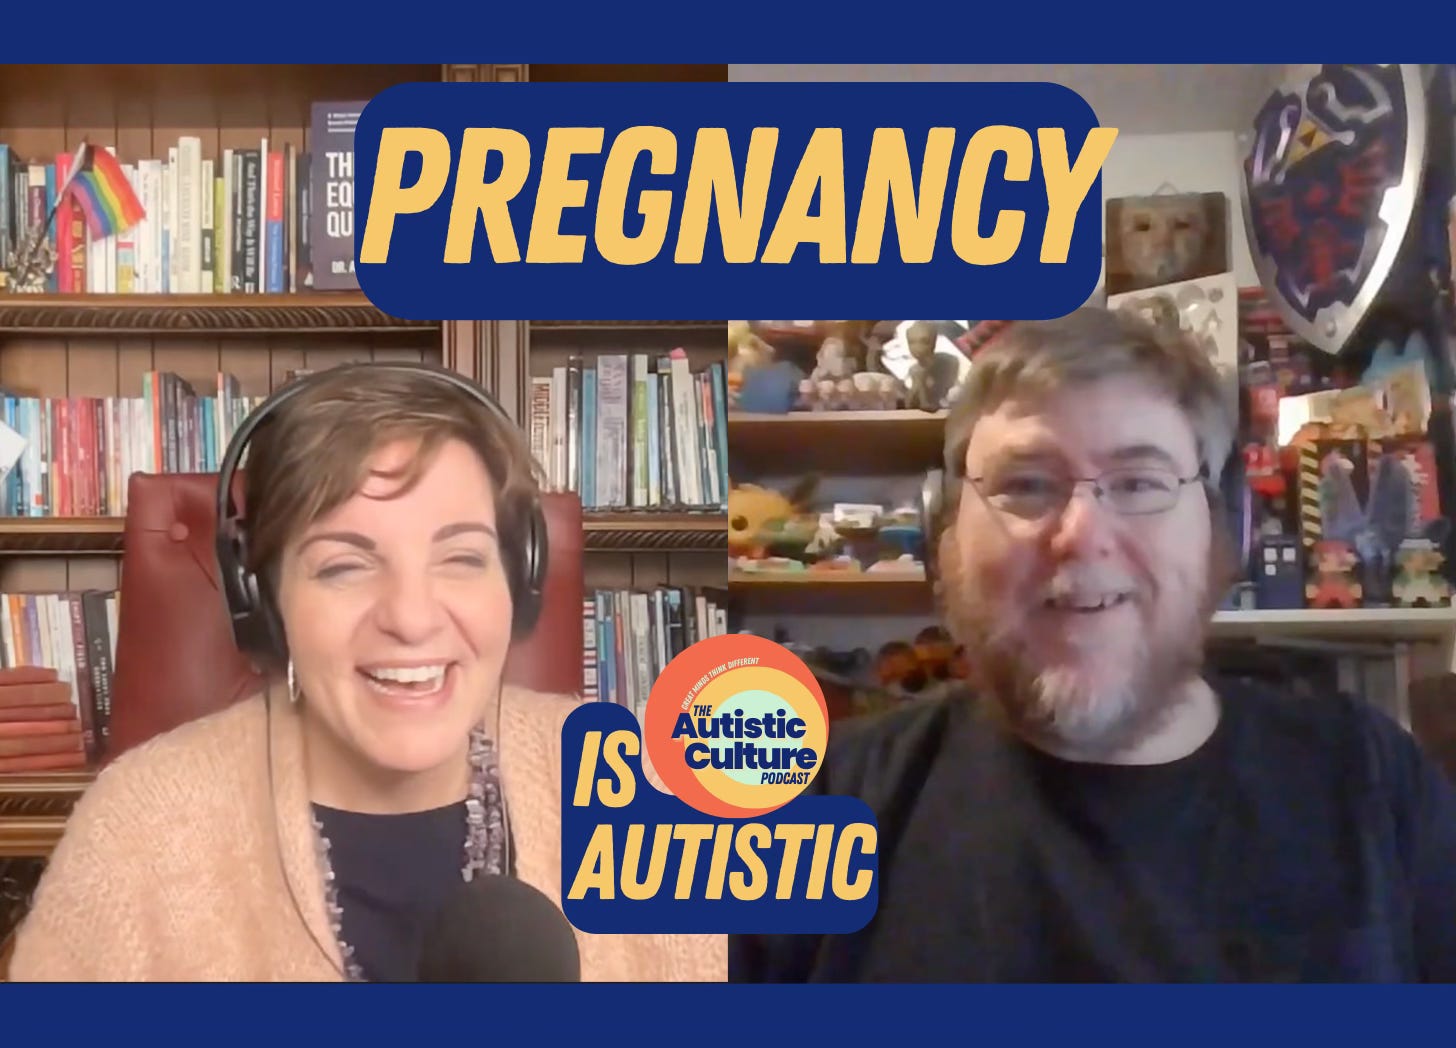 Pregnancy is Autistic. Two autistic adults discuss pregnancy and autism. What to expect when you're autistic and expecting. Autistic people struggle to find autistic-affirming information about their pregnancy. They also struggle to get their needs met within the capitalistic medical system that is frequently ableist and prioritizes profits over people.